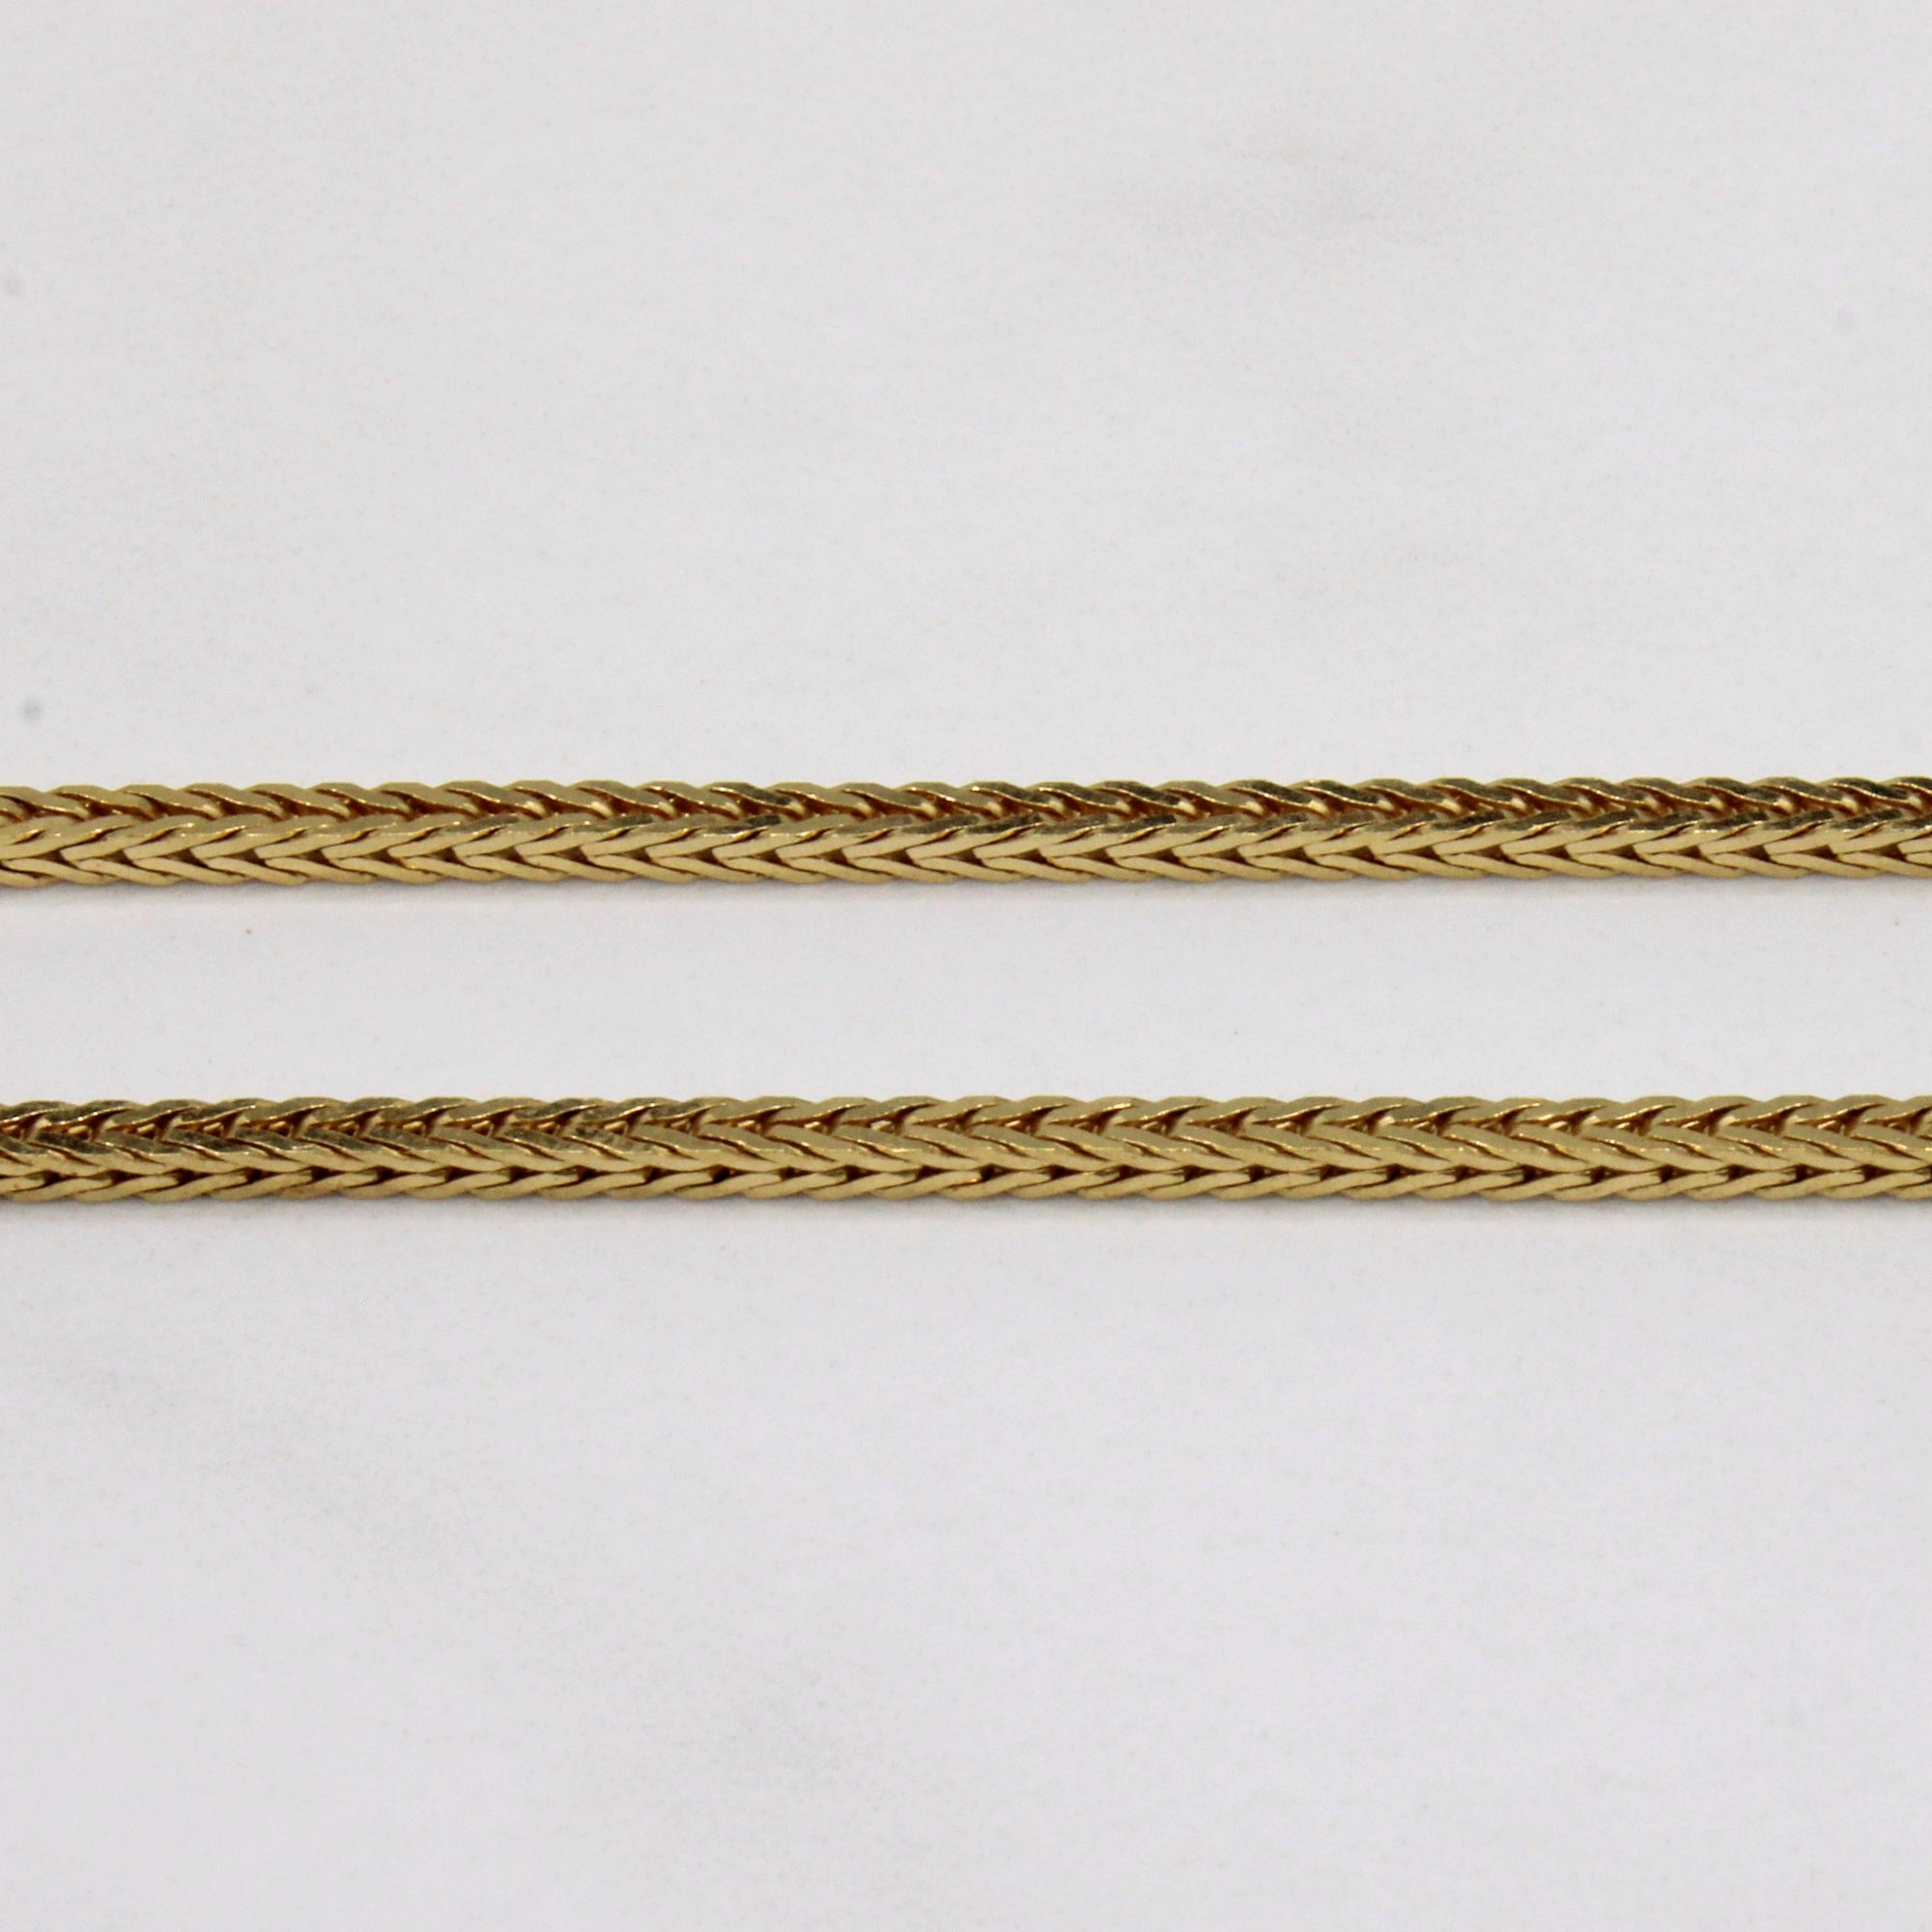 18k Yellow Gold Birdcage Link Chain | 35